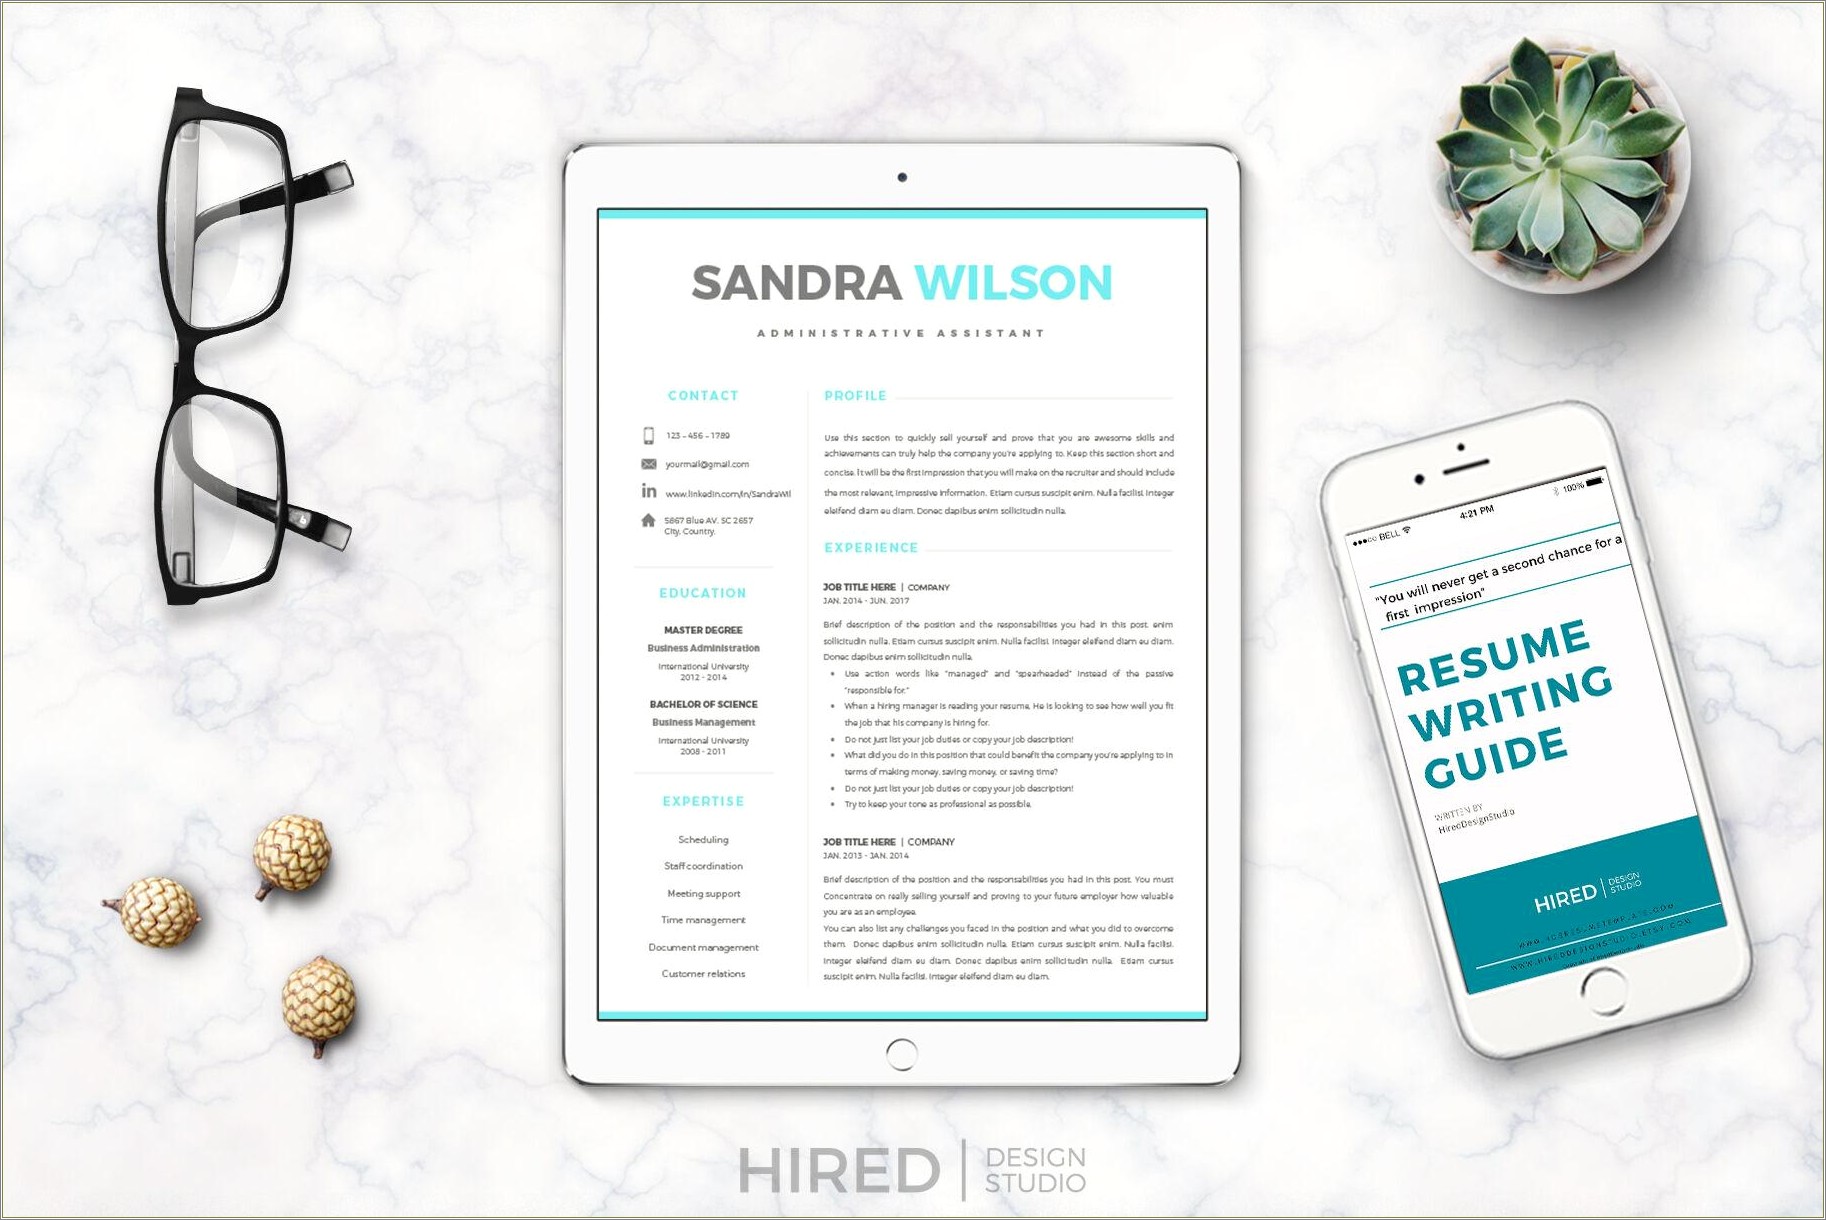 Resume References Work Phone Or Mobile